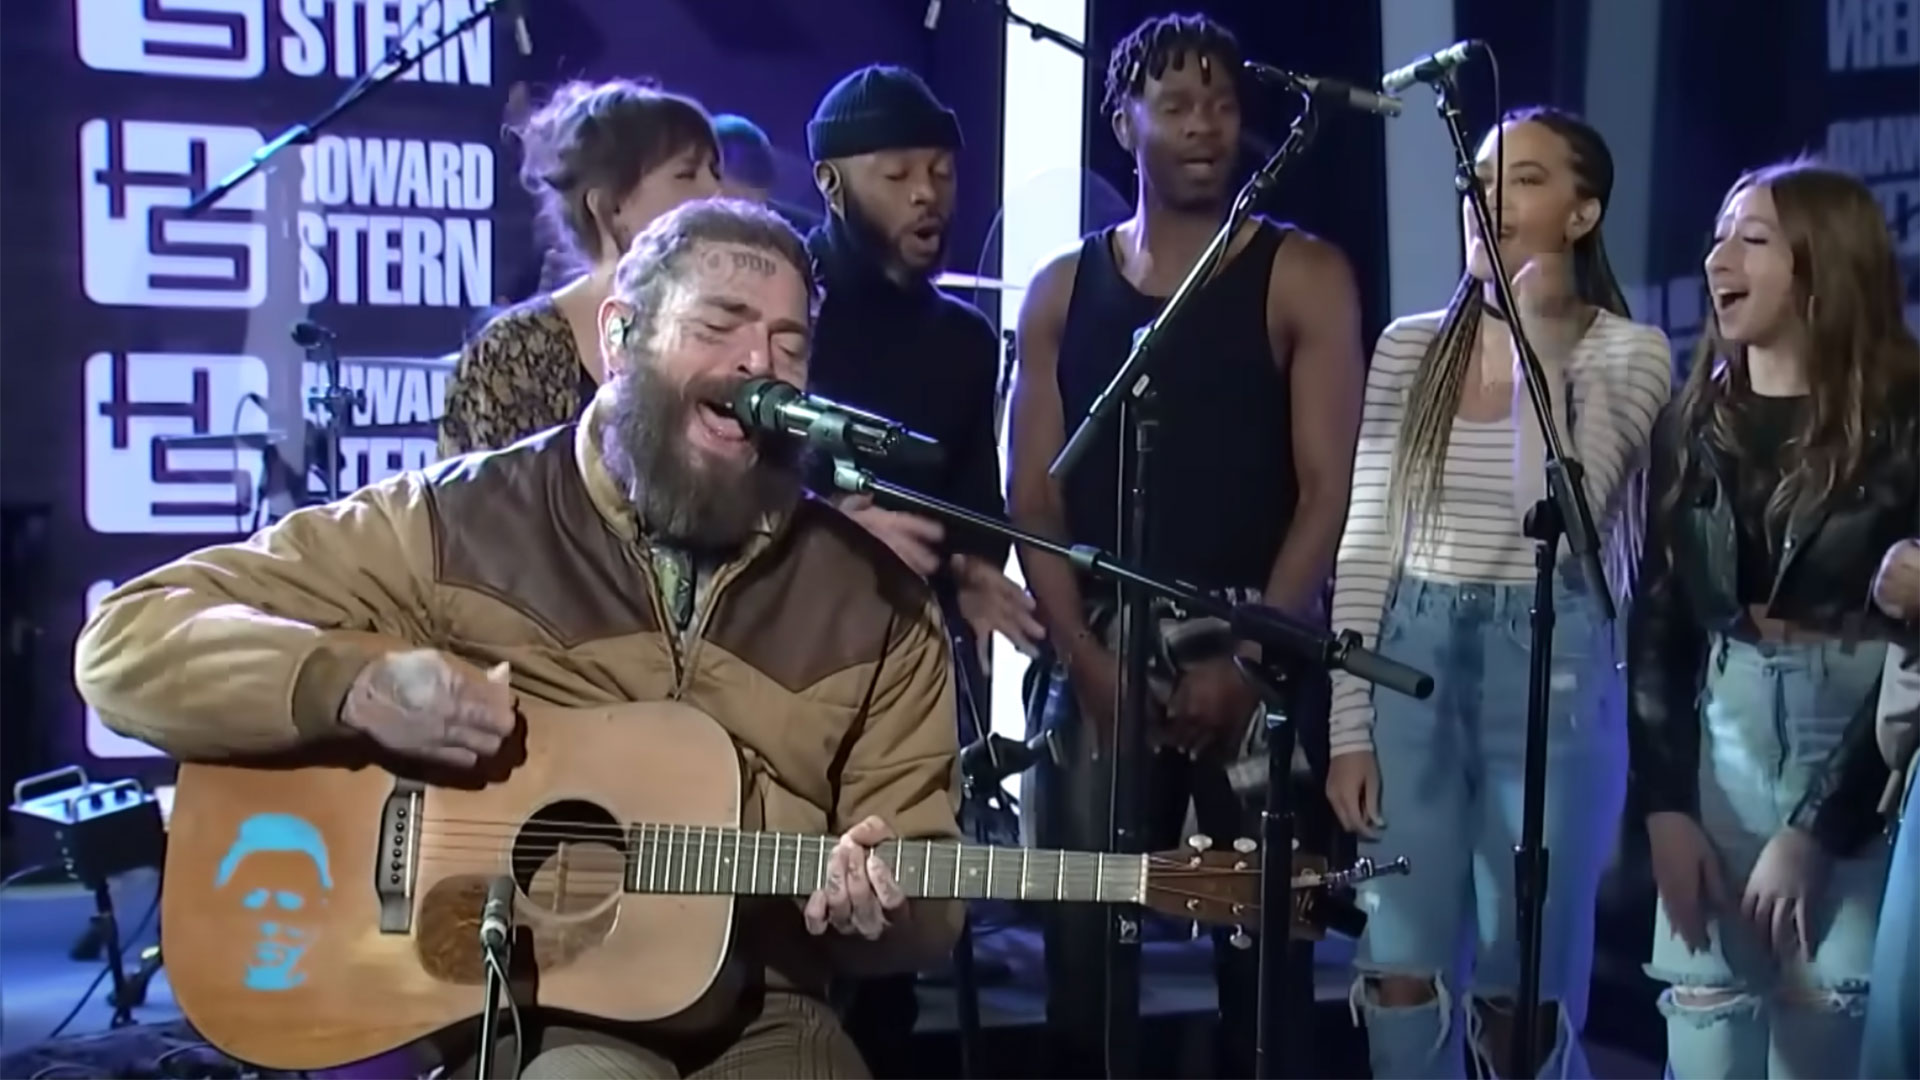 “Beautiful”: Post Malone nods to his rock roots once again with a killer guitar cover of Alice In Chains' Them Bones – accompanied by a full choir #PostMalone